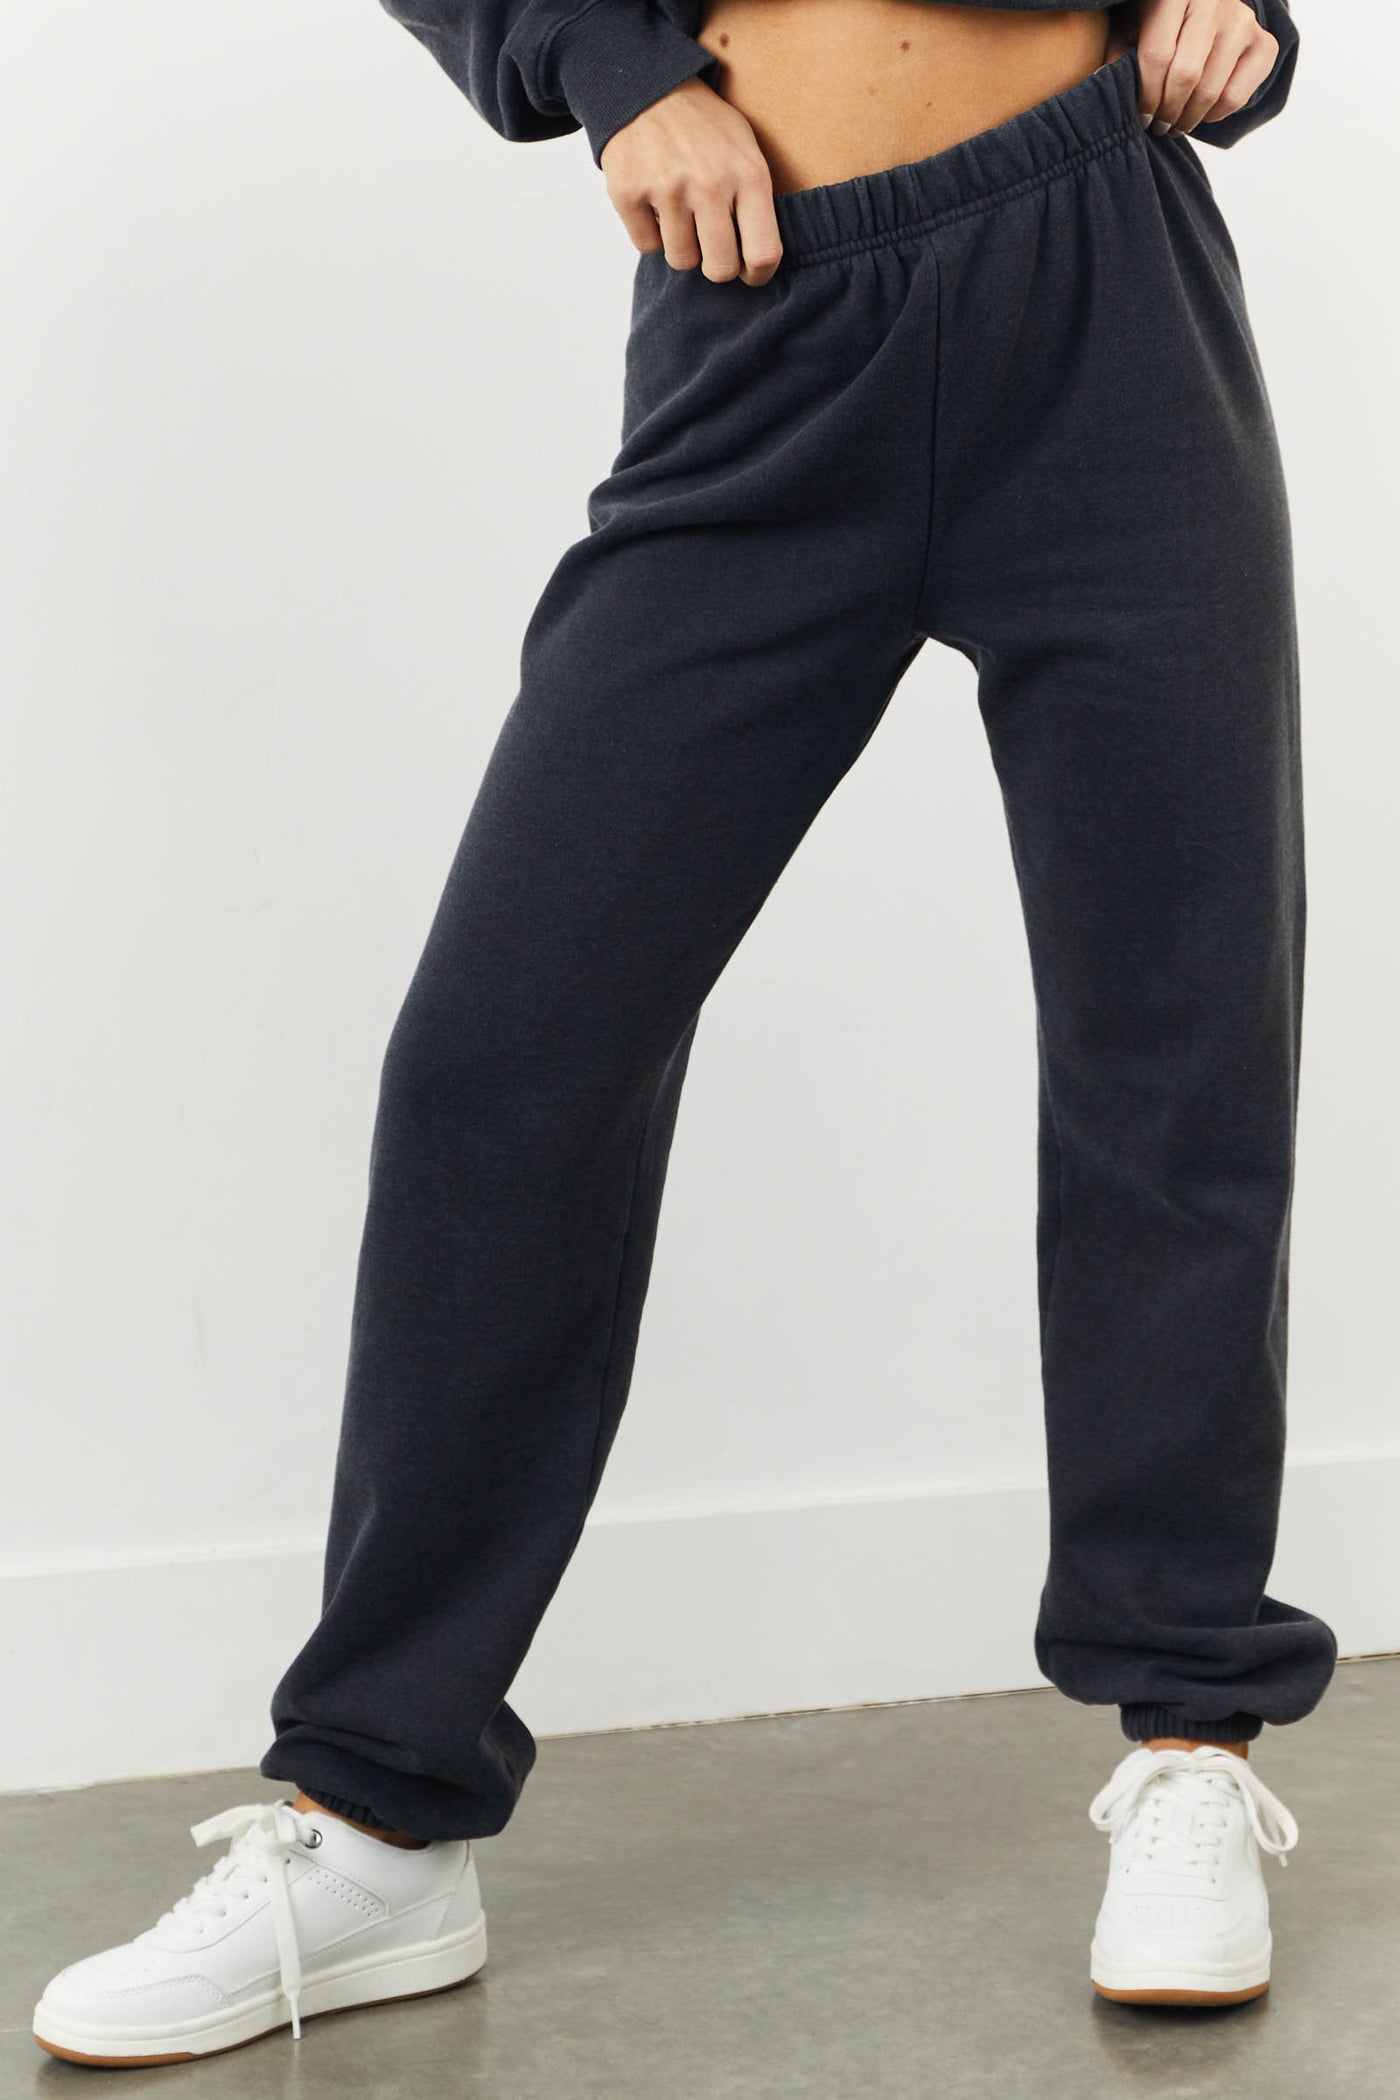 Washed Black Fleece Lined Solid Cotton Sweatpants